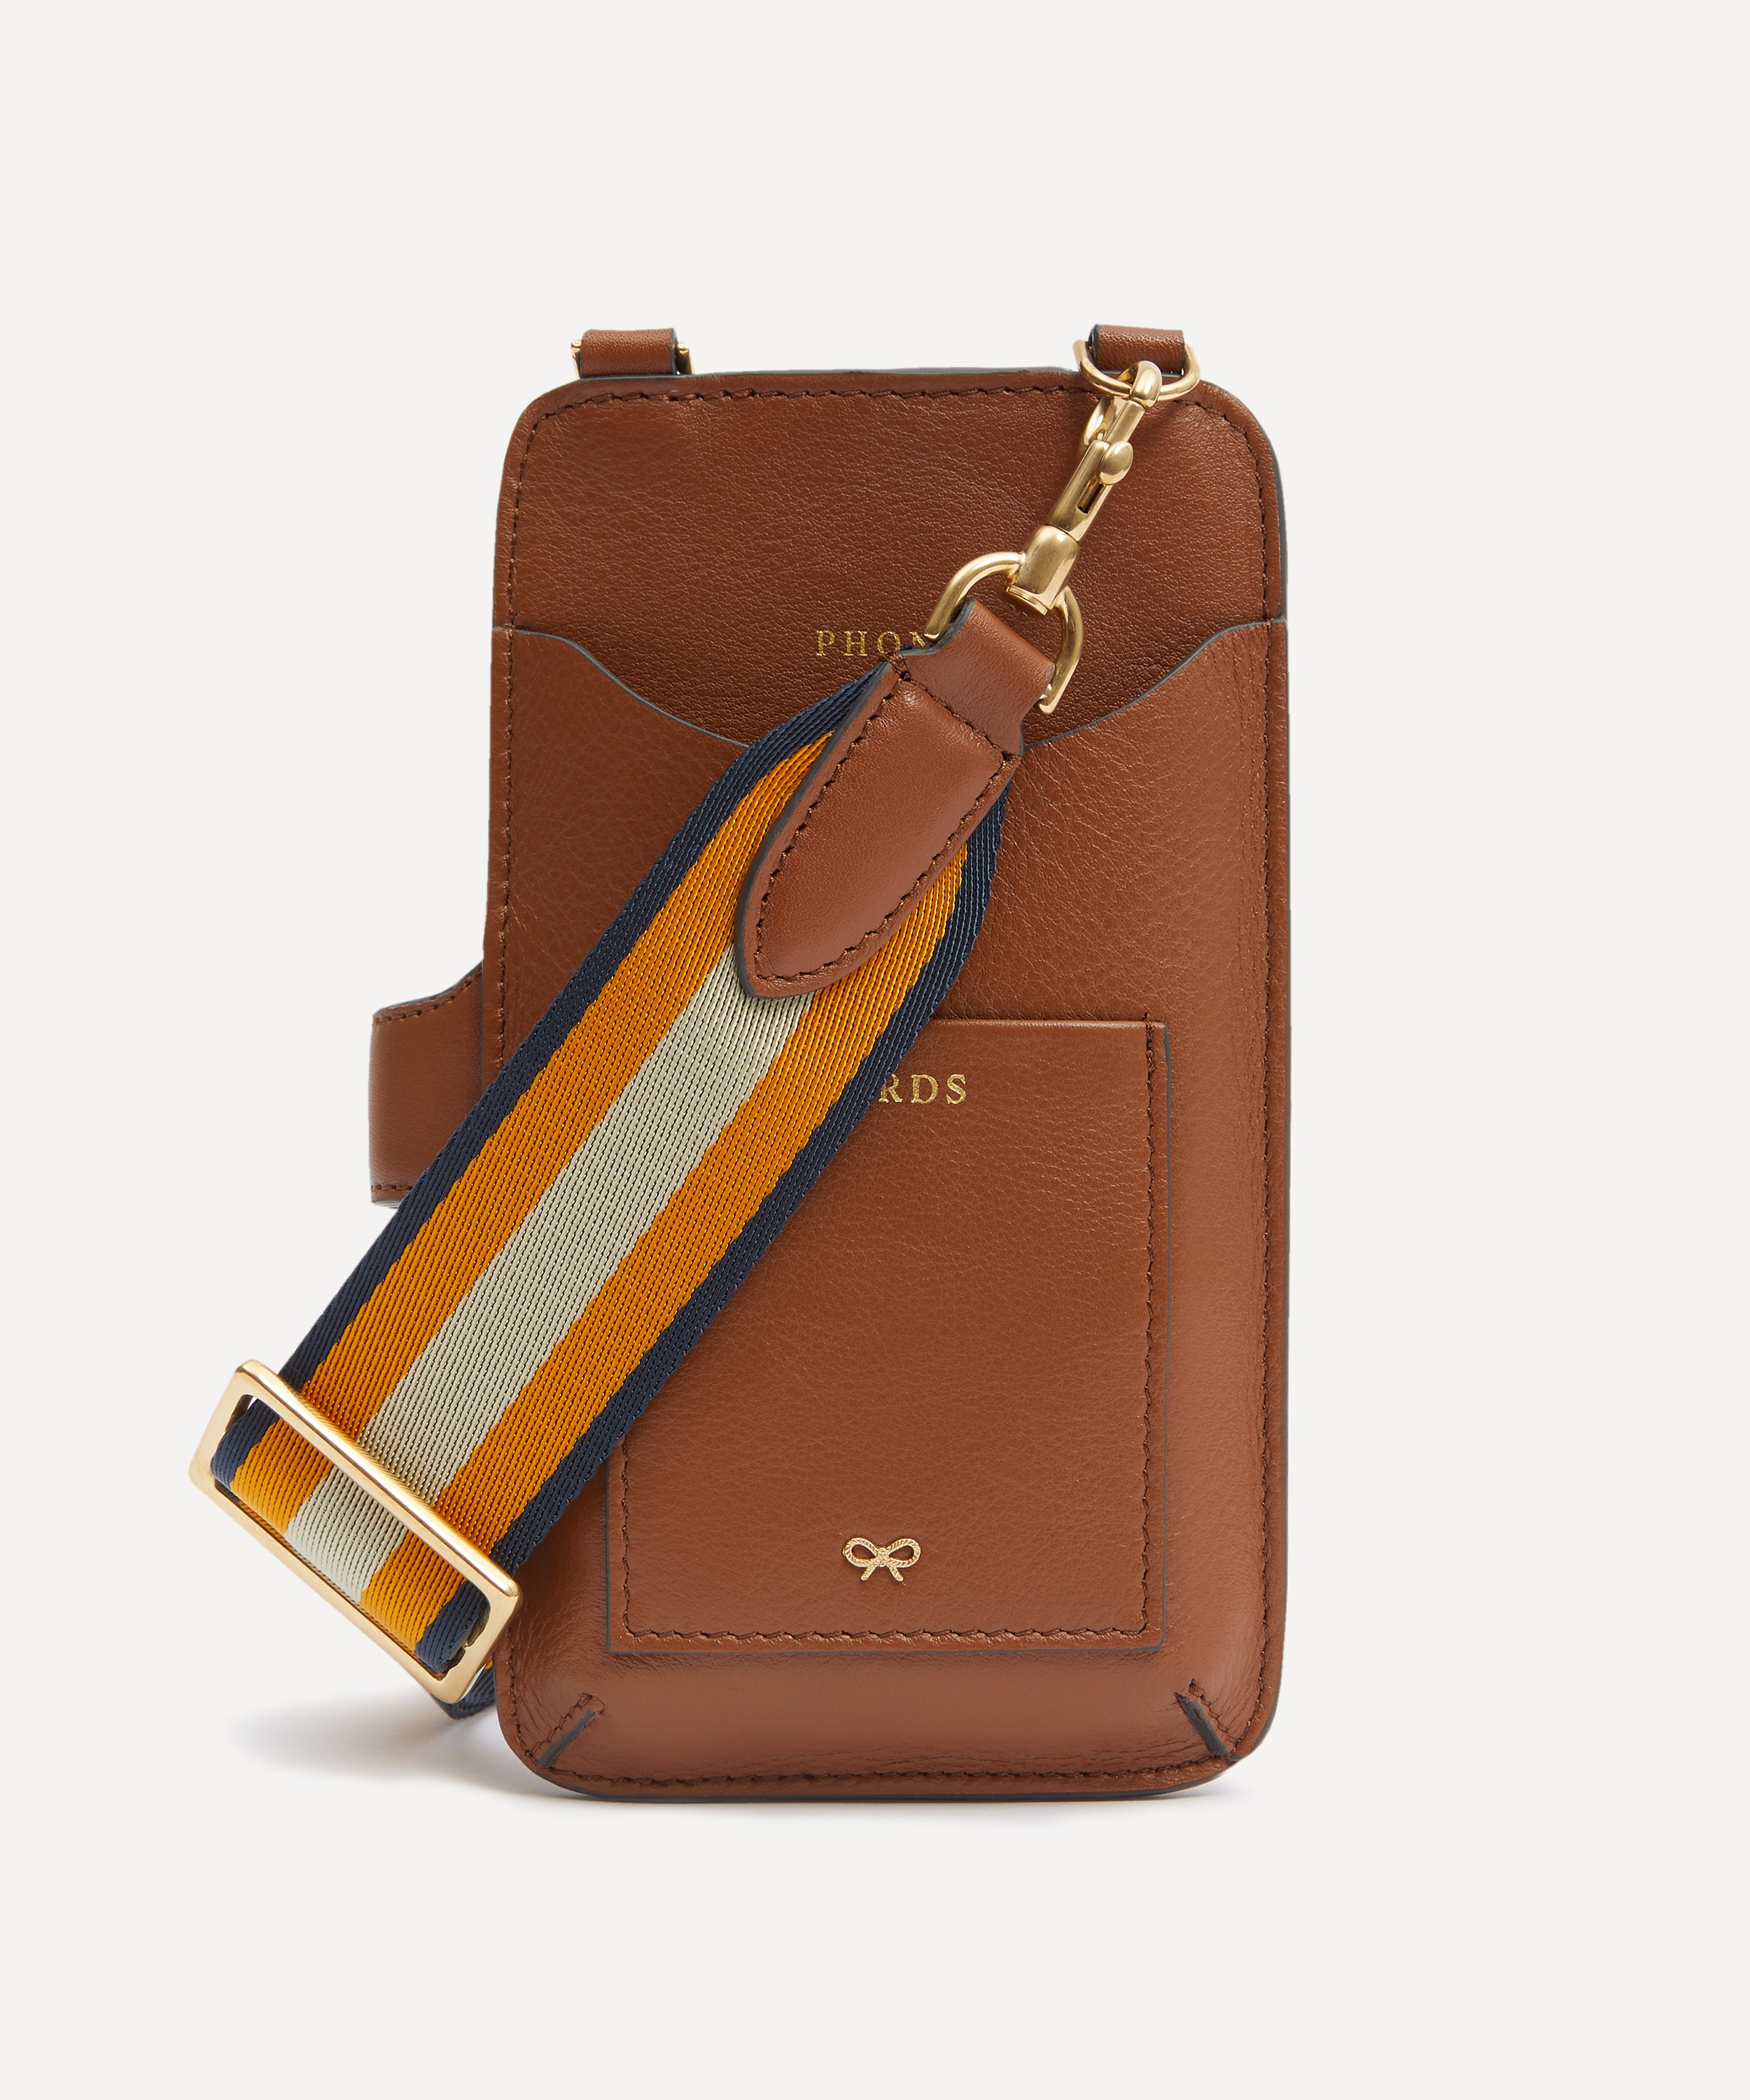 Anya Hindmarch Nastro Phone Pouch On Strap | Liberty